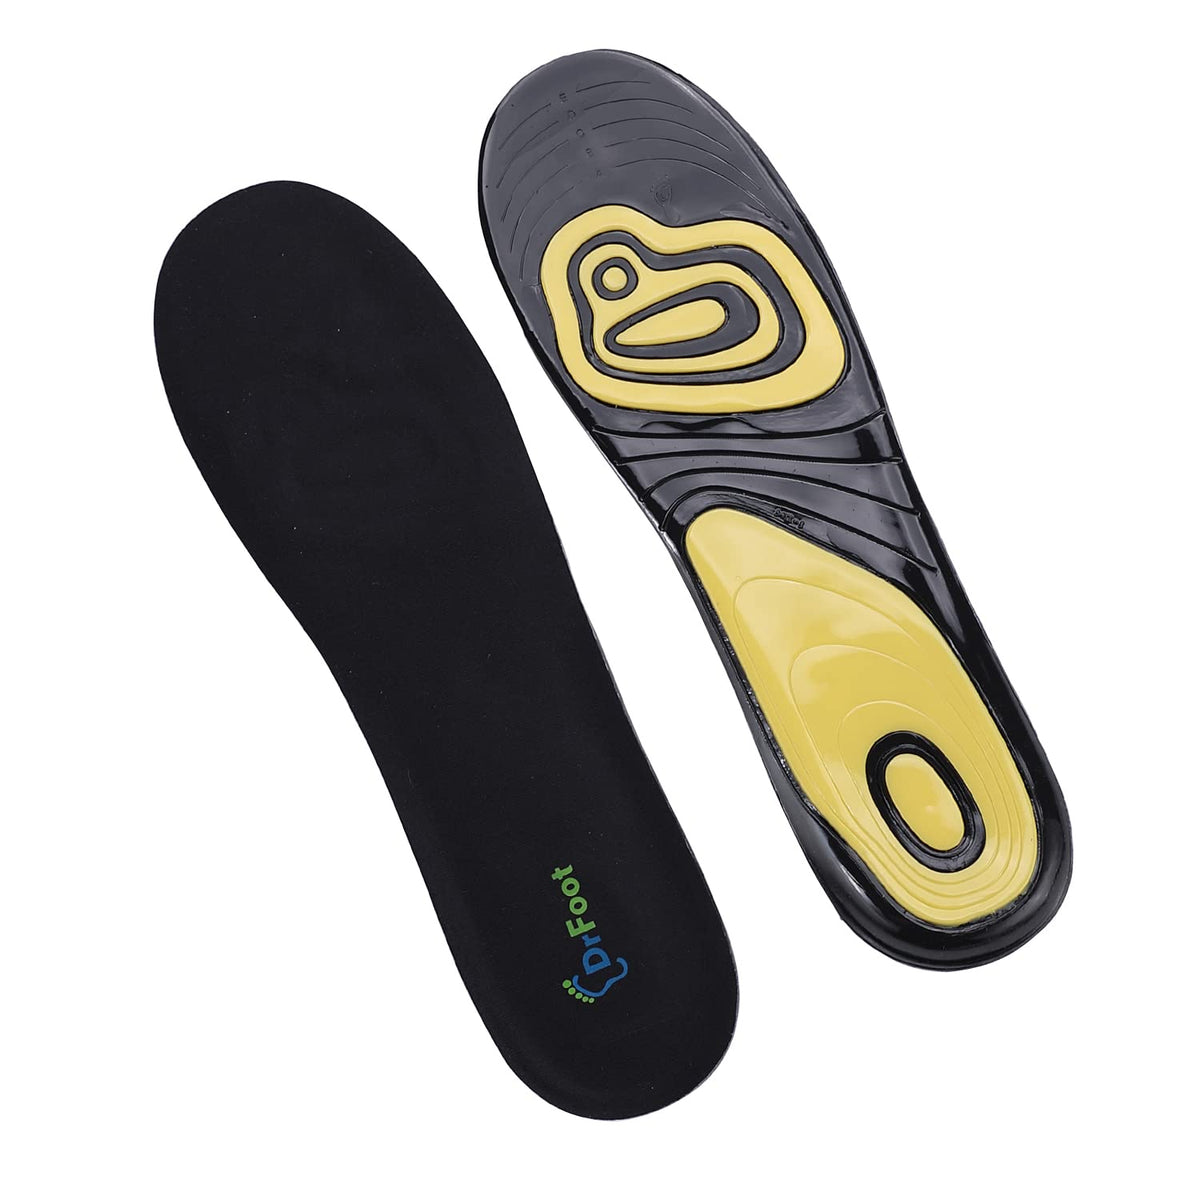 Dr Foot Dual Gel Insoles Anti-Microbial | For Walking, Running, Hiking & Regular Use | All Day Ultra Comfrort & Support & Shock Absorption With Dual Gel Technology | For Men – 1 Pair